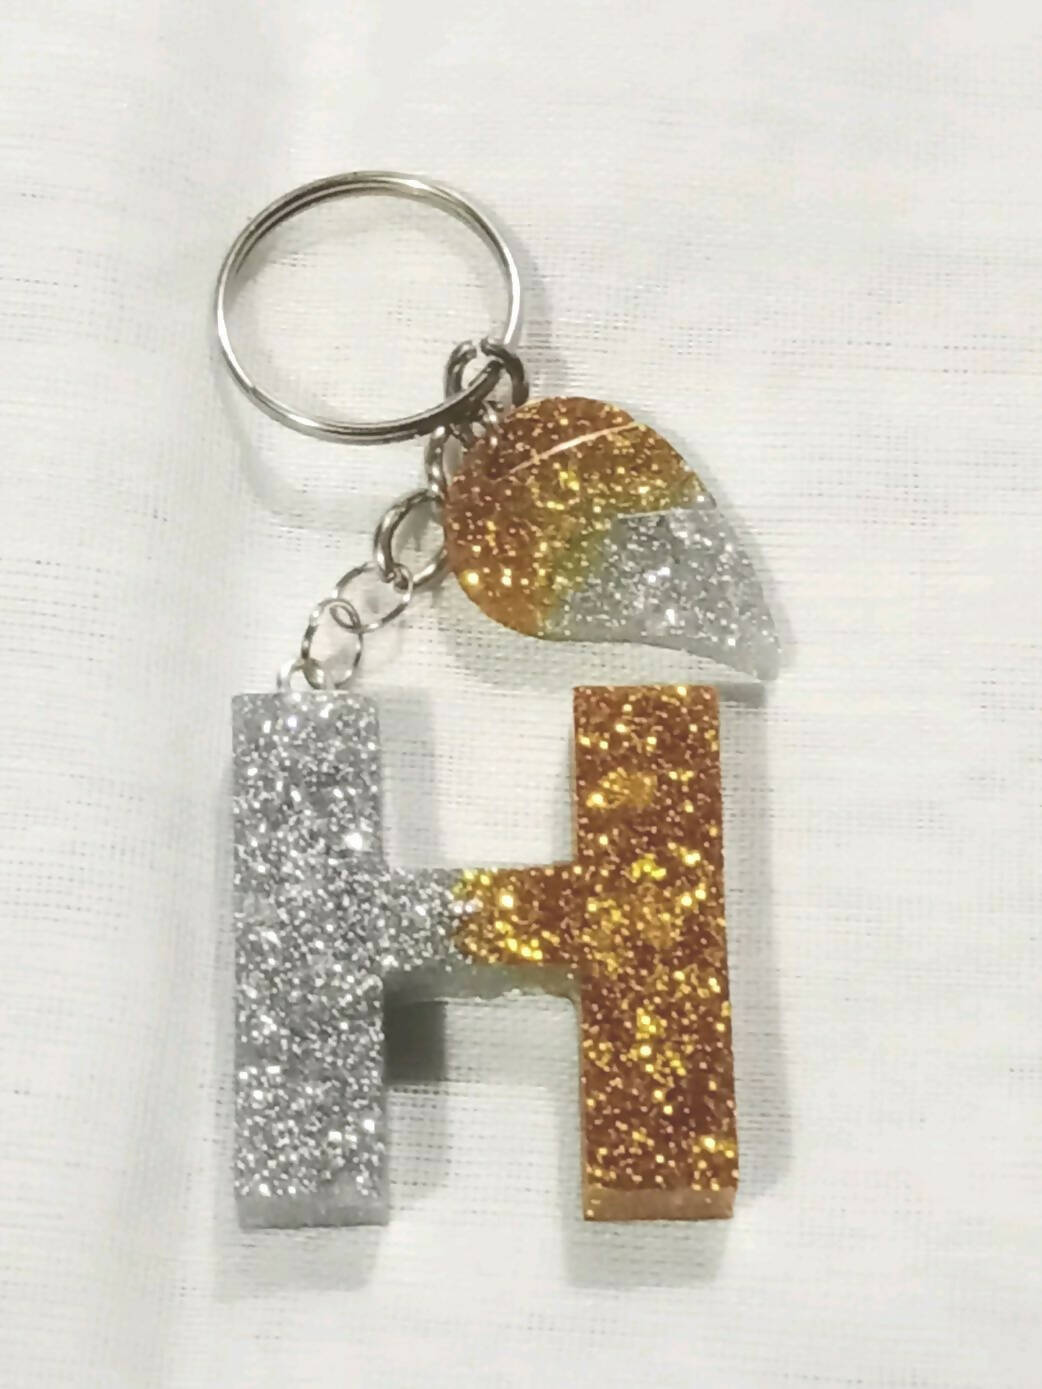 Hand Made Beautiful Resin Keychain With Charms